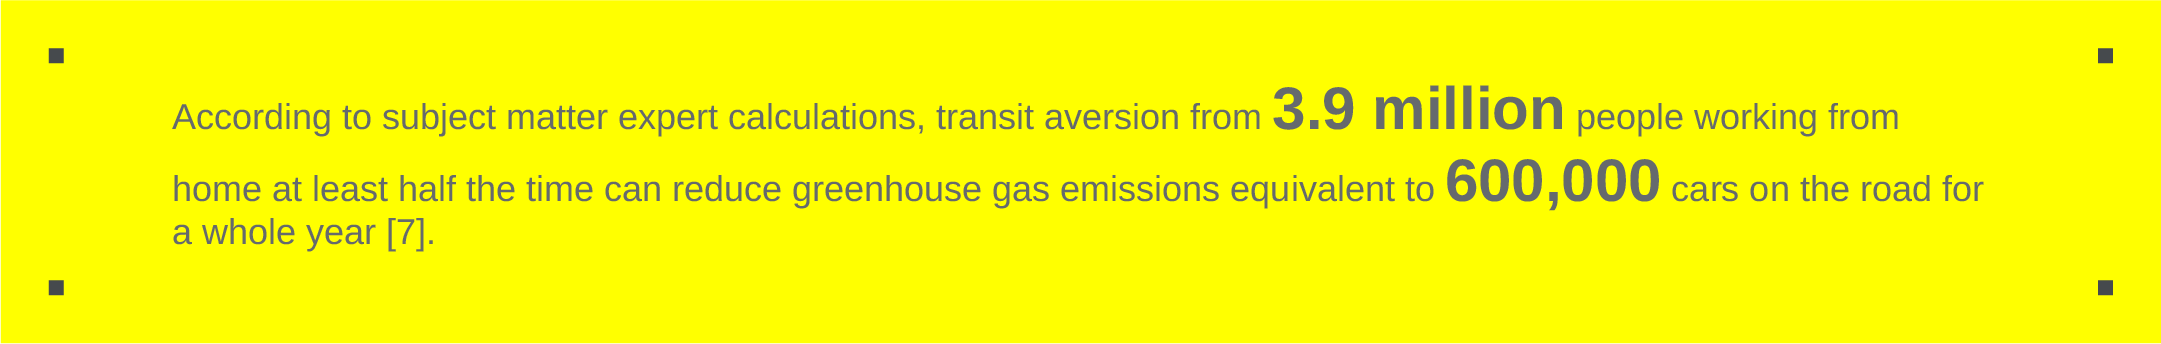 According to subject matter expert calculations, transit aversion from 3.9 million people working from home at least half the time can reduce greenhouse gas emissions equivalent to 600,000 cars on the road for a whole year [7]. 